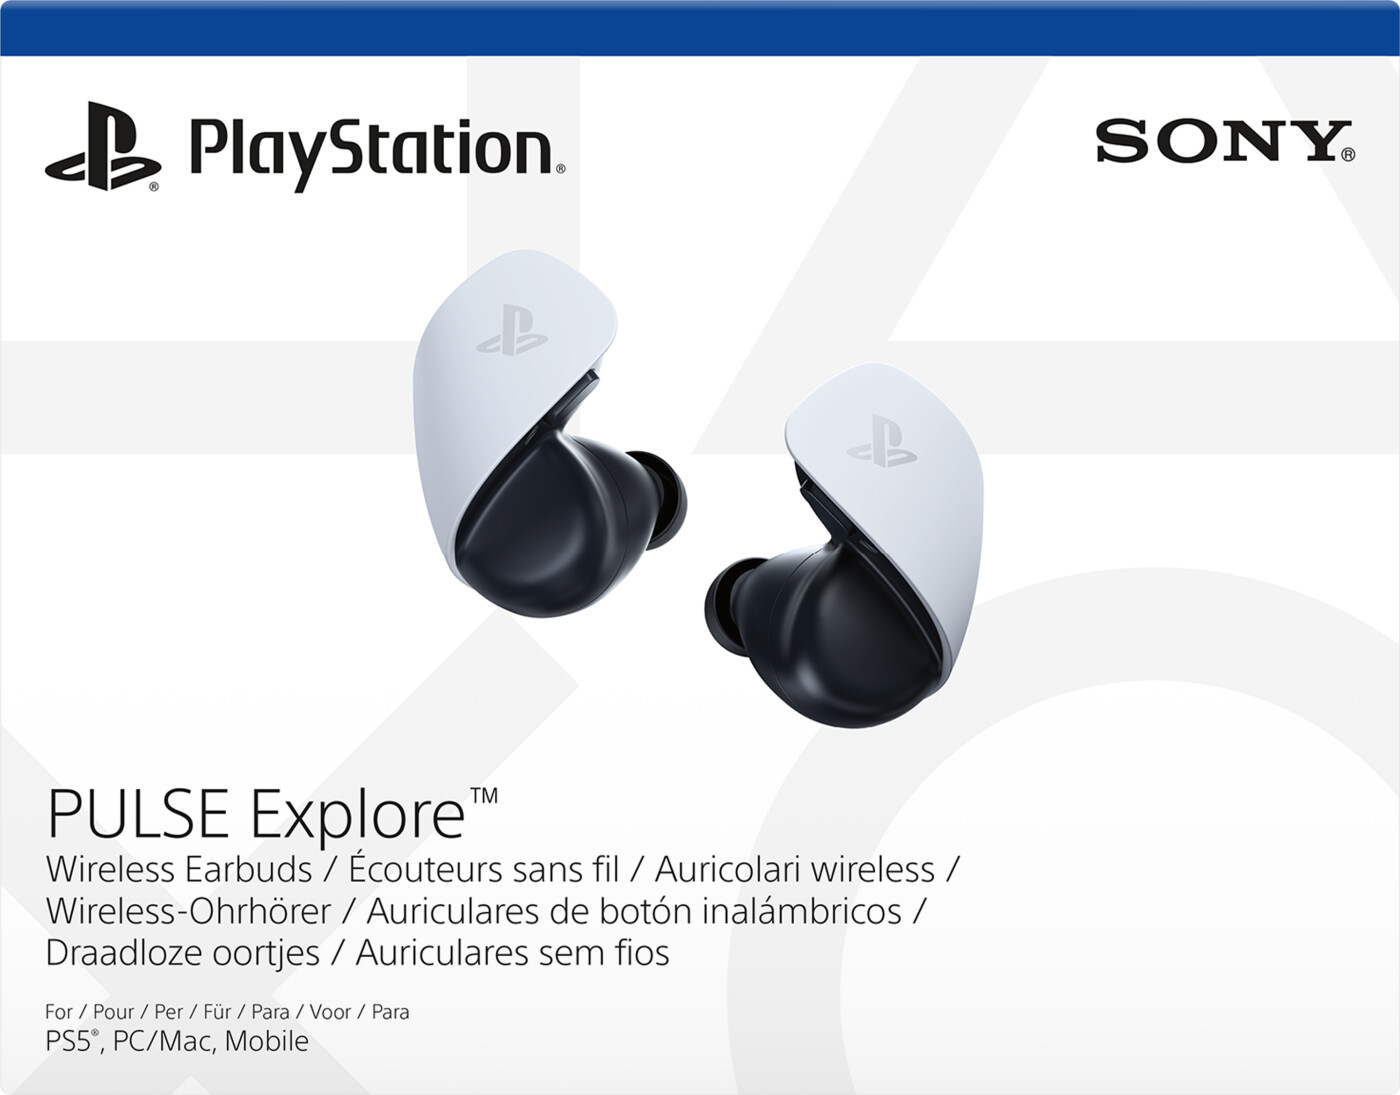 Se Sony - Playstation 5 Pulse Explore - Wireless Earbuds hos Gucca.dk